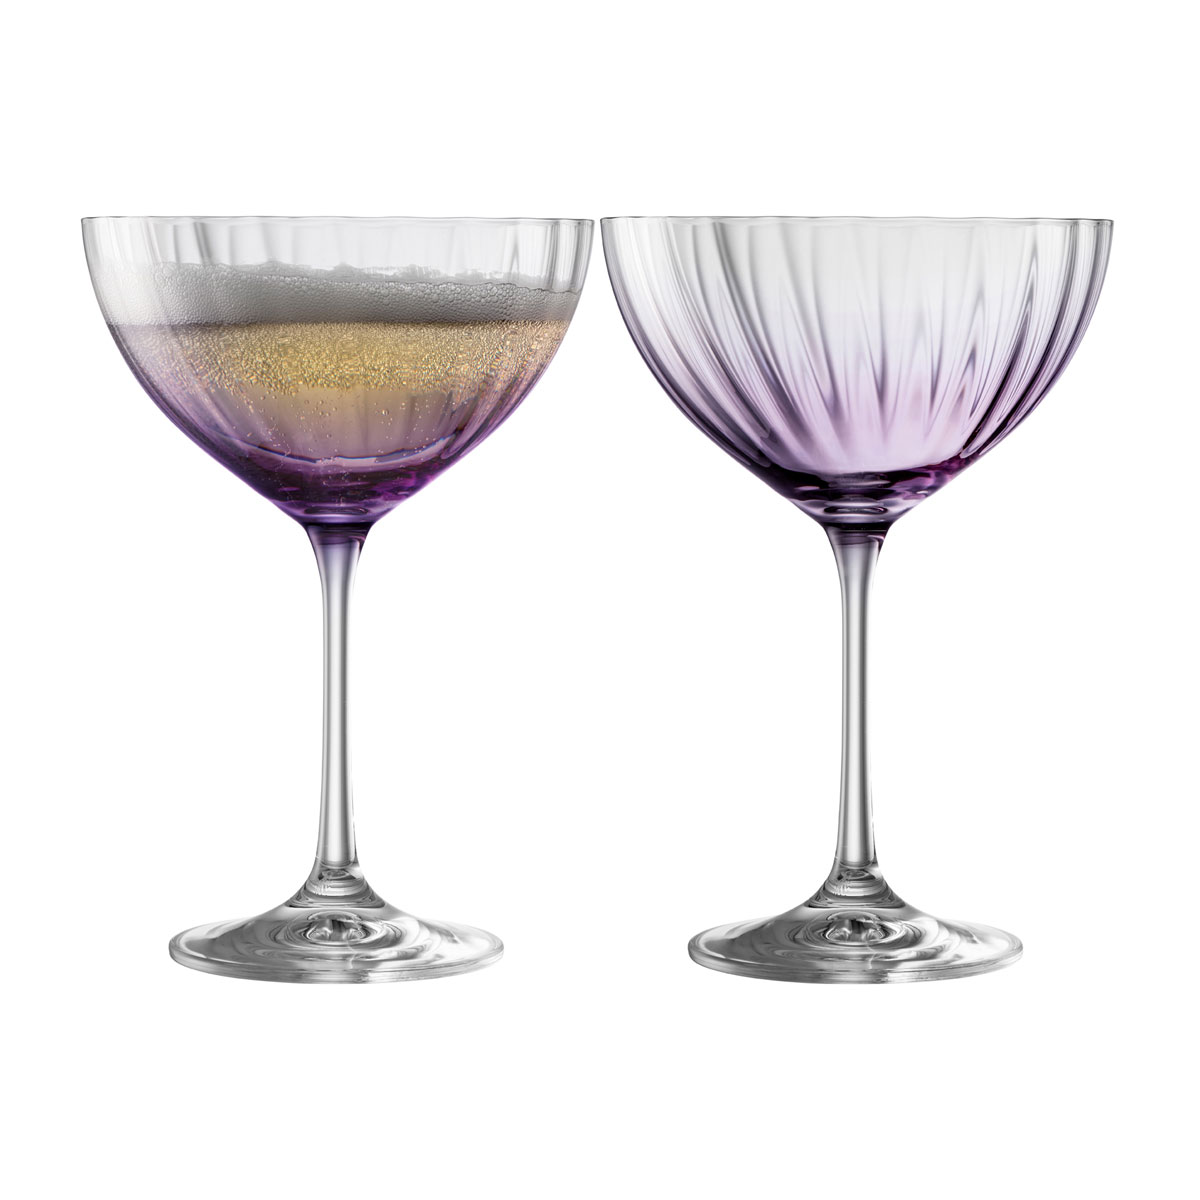 Galway Erne Cocktail, Saucer Champagne Pair in Amethyst